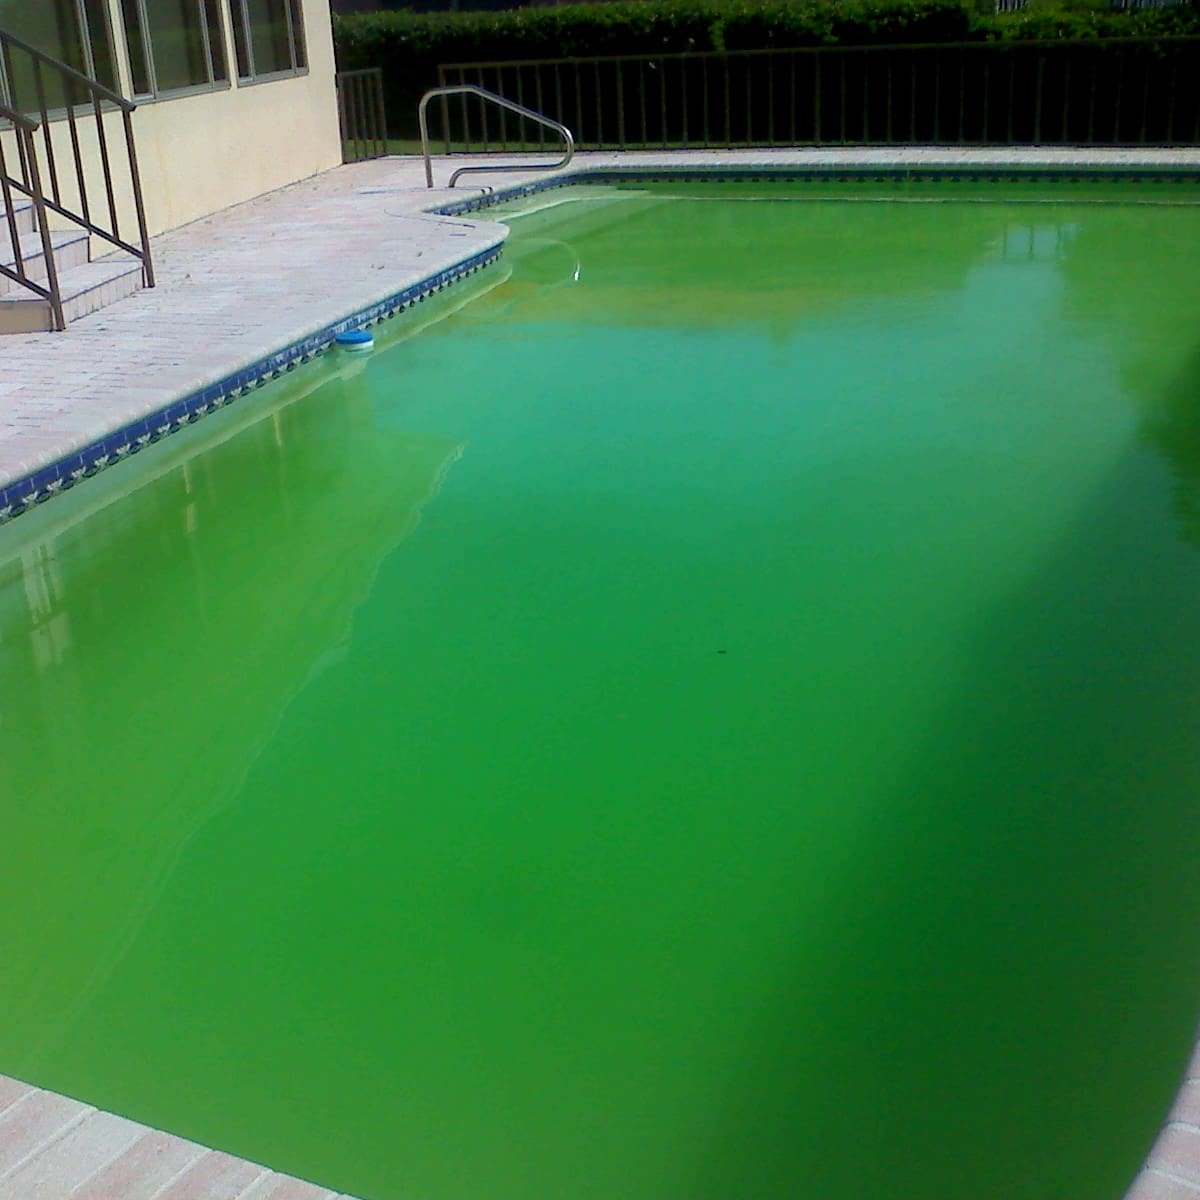 How to Keep Algae Out of Your Pool - Dengarden